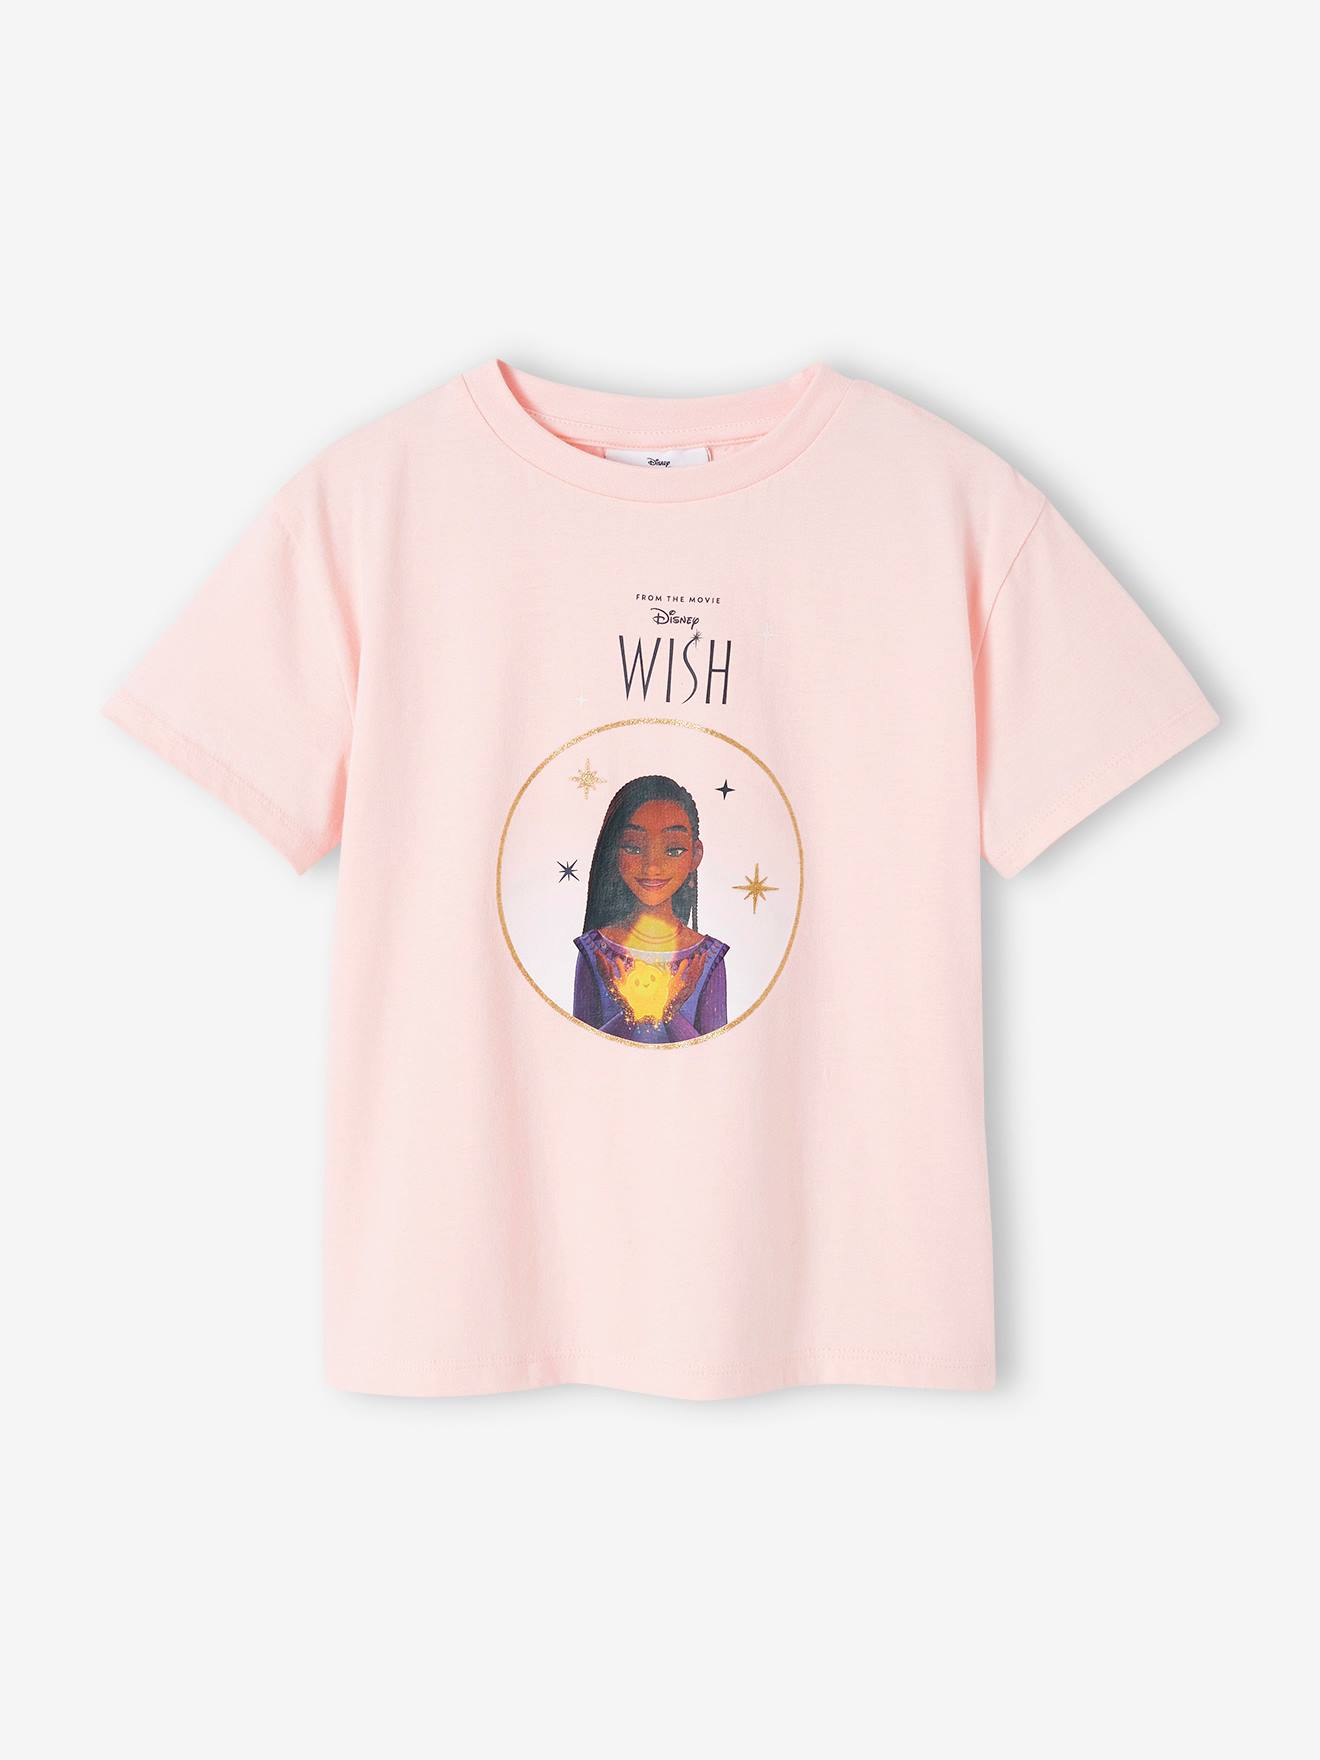 Wish T-Shirt for Girls by Disney(r) rose